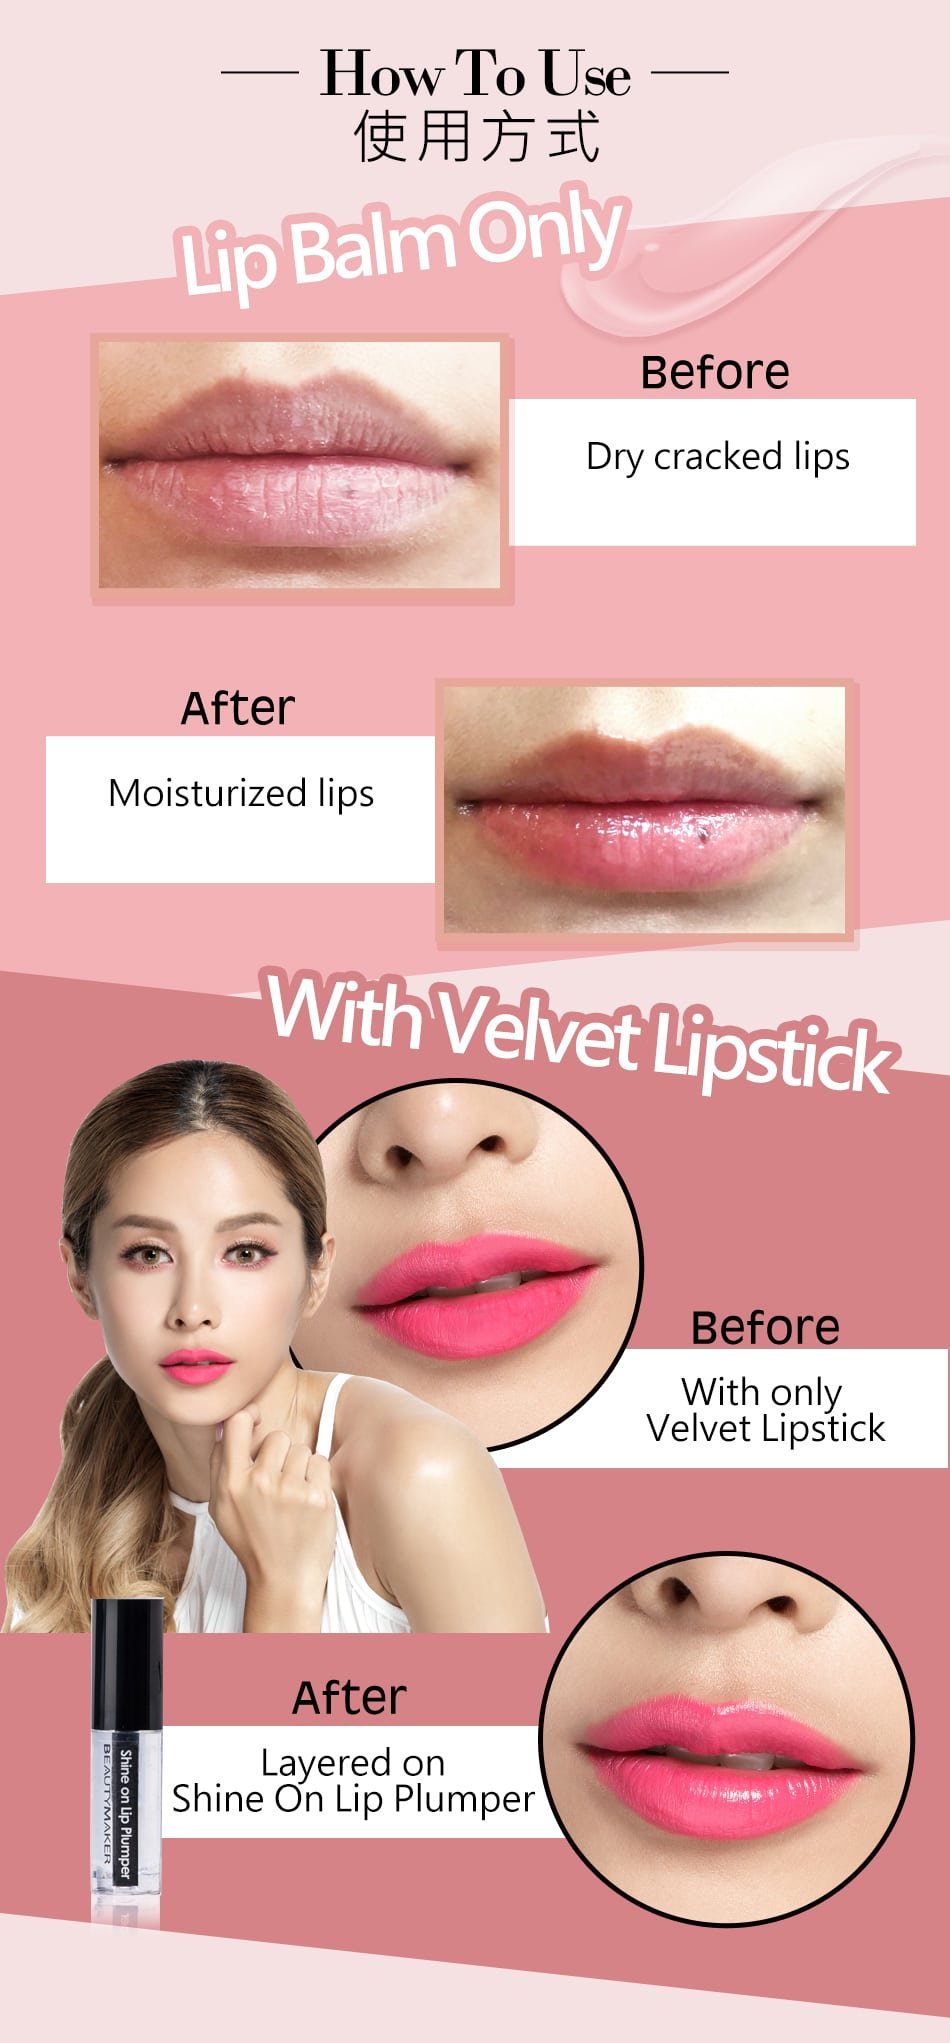 Shine On Lip Plumper - How to use